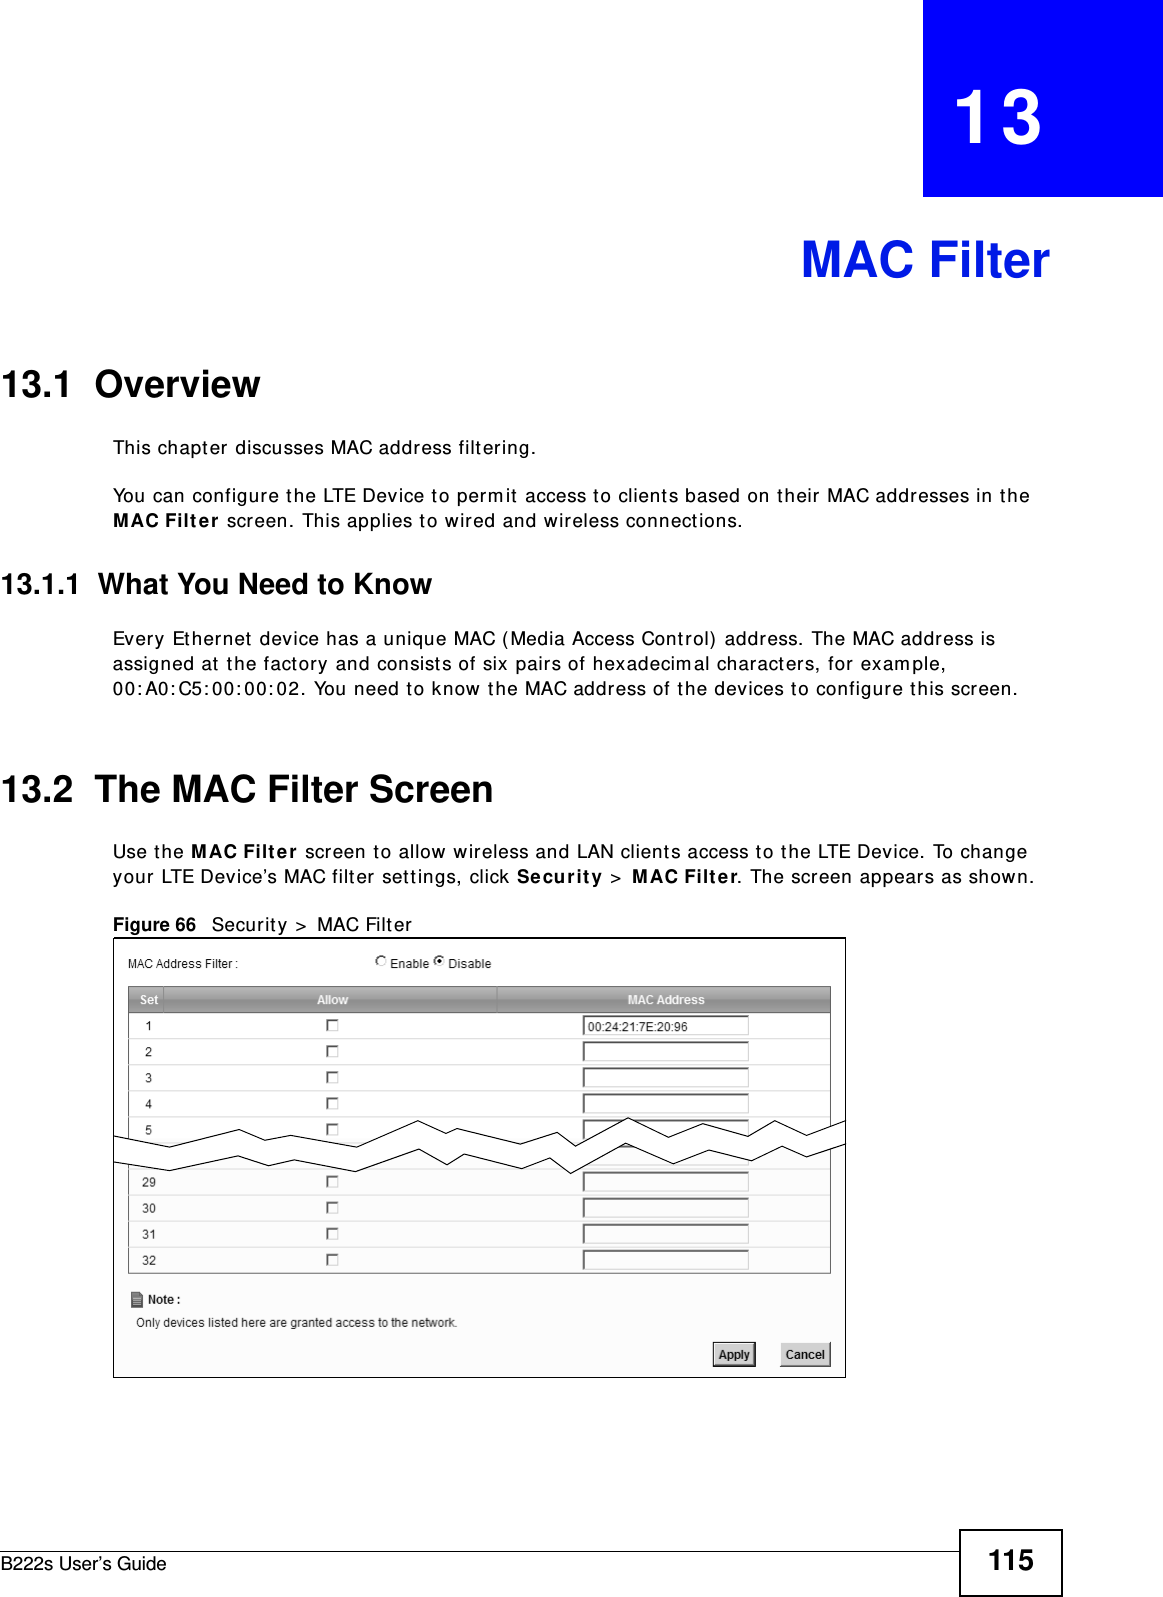 B222s User’s Guide 115CHAPTER   13MAC Filter13.1  OverviewThis chapt er  discusses MAC address filt ering.You can configure t he LTE Device t o perm it access to client s based on t heir MAC addresses in t he MAC Filt er  screen. This applies to wired and wireless connect ions.13.1.1  What You Need to KnowEvery Et hernet device has a unique MAC ( Media Access Cont rol)  address. The MAC address is assigned at  the fact ory and consist s of six pairs of hexadecim al charact ers, for exam ple, 00: A0: C5: 00: 00: 02. You need t o know the MAC address of t he devices t o configure t his screen.13.2  The MAC Filter ScreenUse t he M AC Filter screen t o allow wireless and LAN clients access t o t he LTE Device. To change your LTE Device’s MAC filter settings, click Secur it y &gt;  M AC Filte r. The screen appears as shown.Figure 66   Securit y &gt;  MAC Filt er